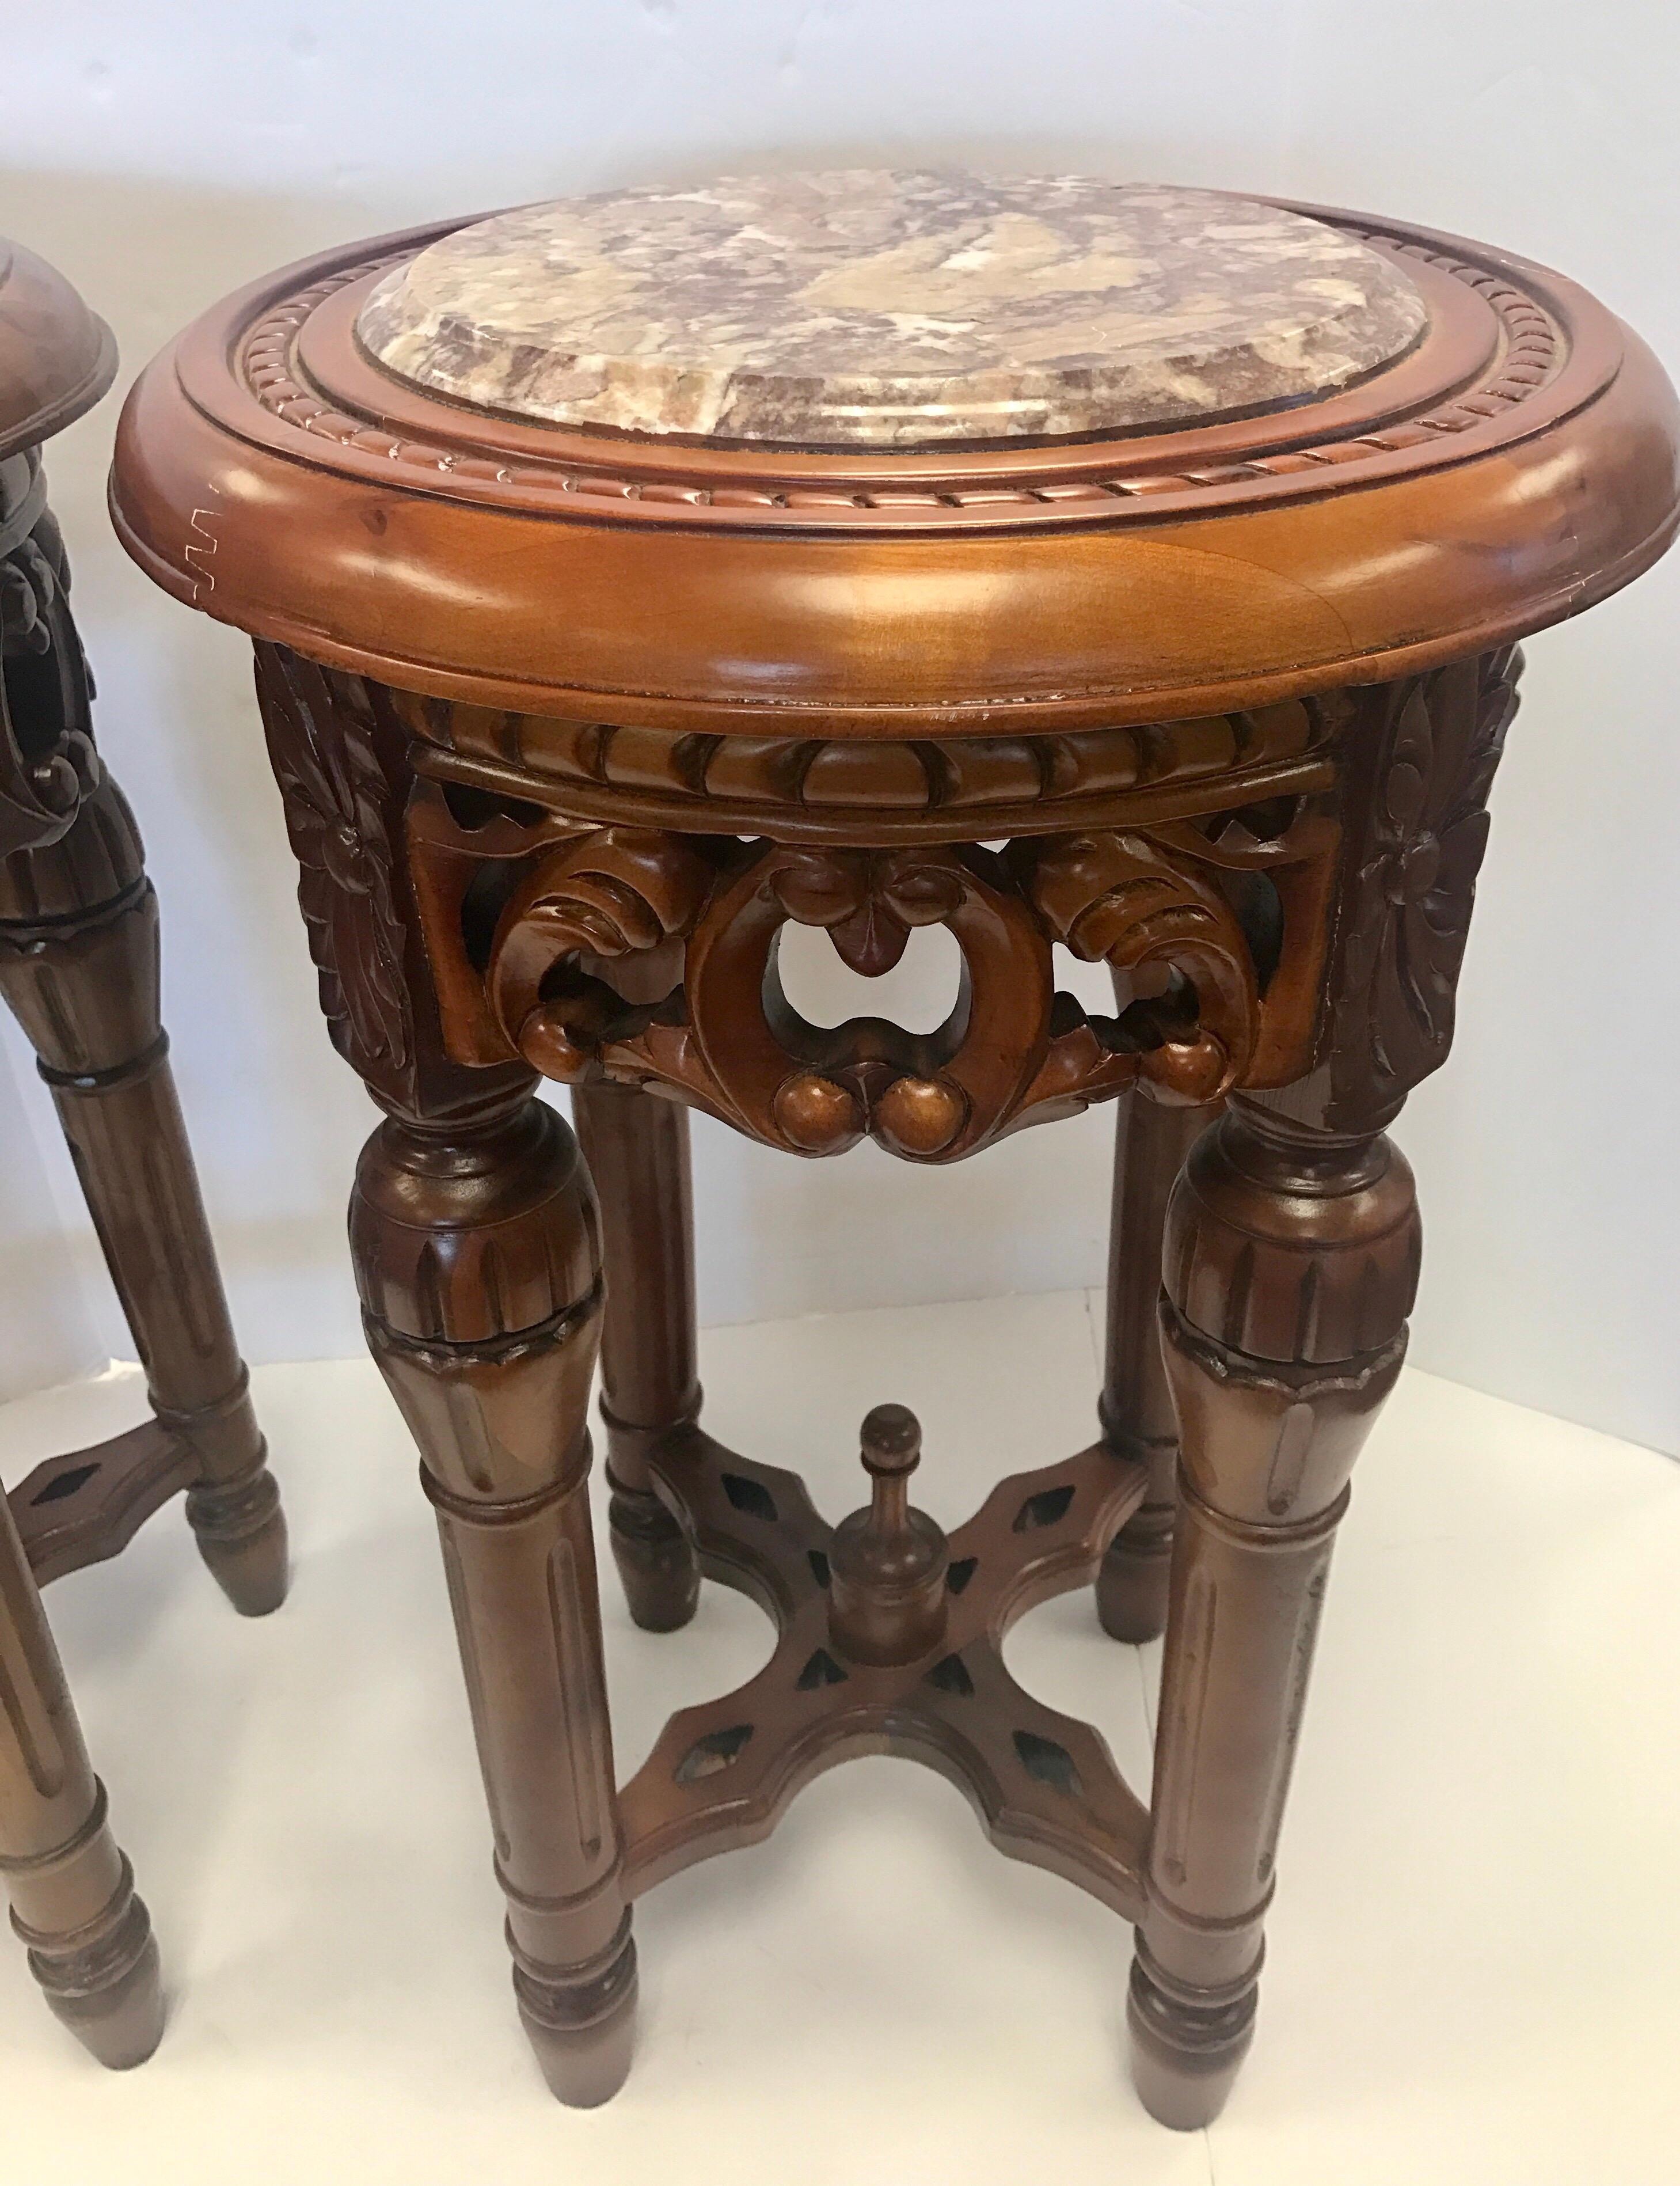 Intricately carved pair of wooden Chinese pedestals with marble insert at top. Gorgeous scale to these pieces.